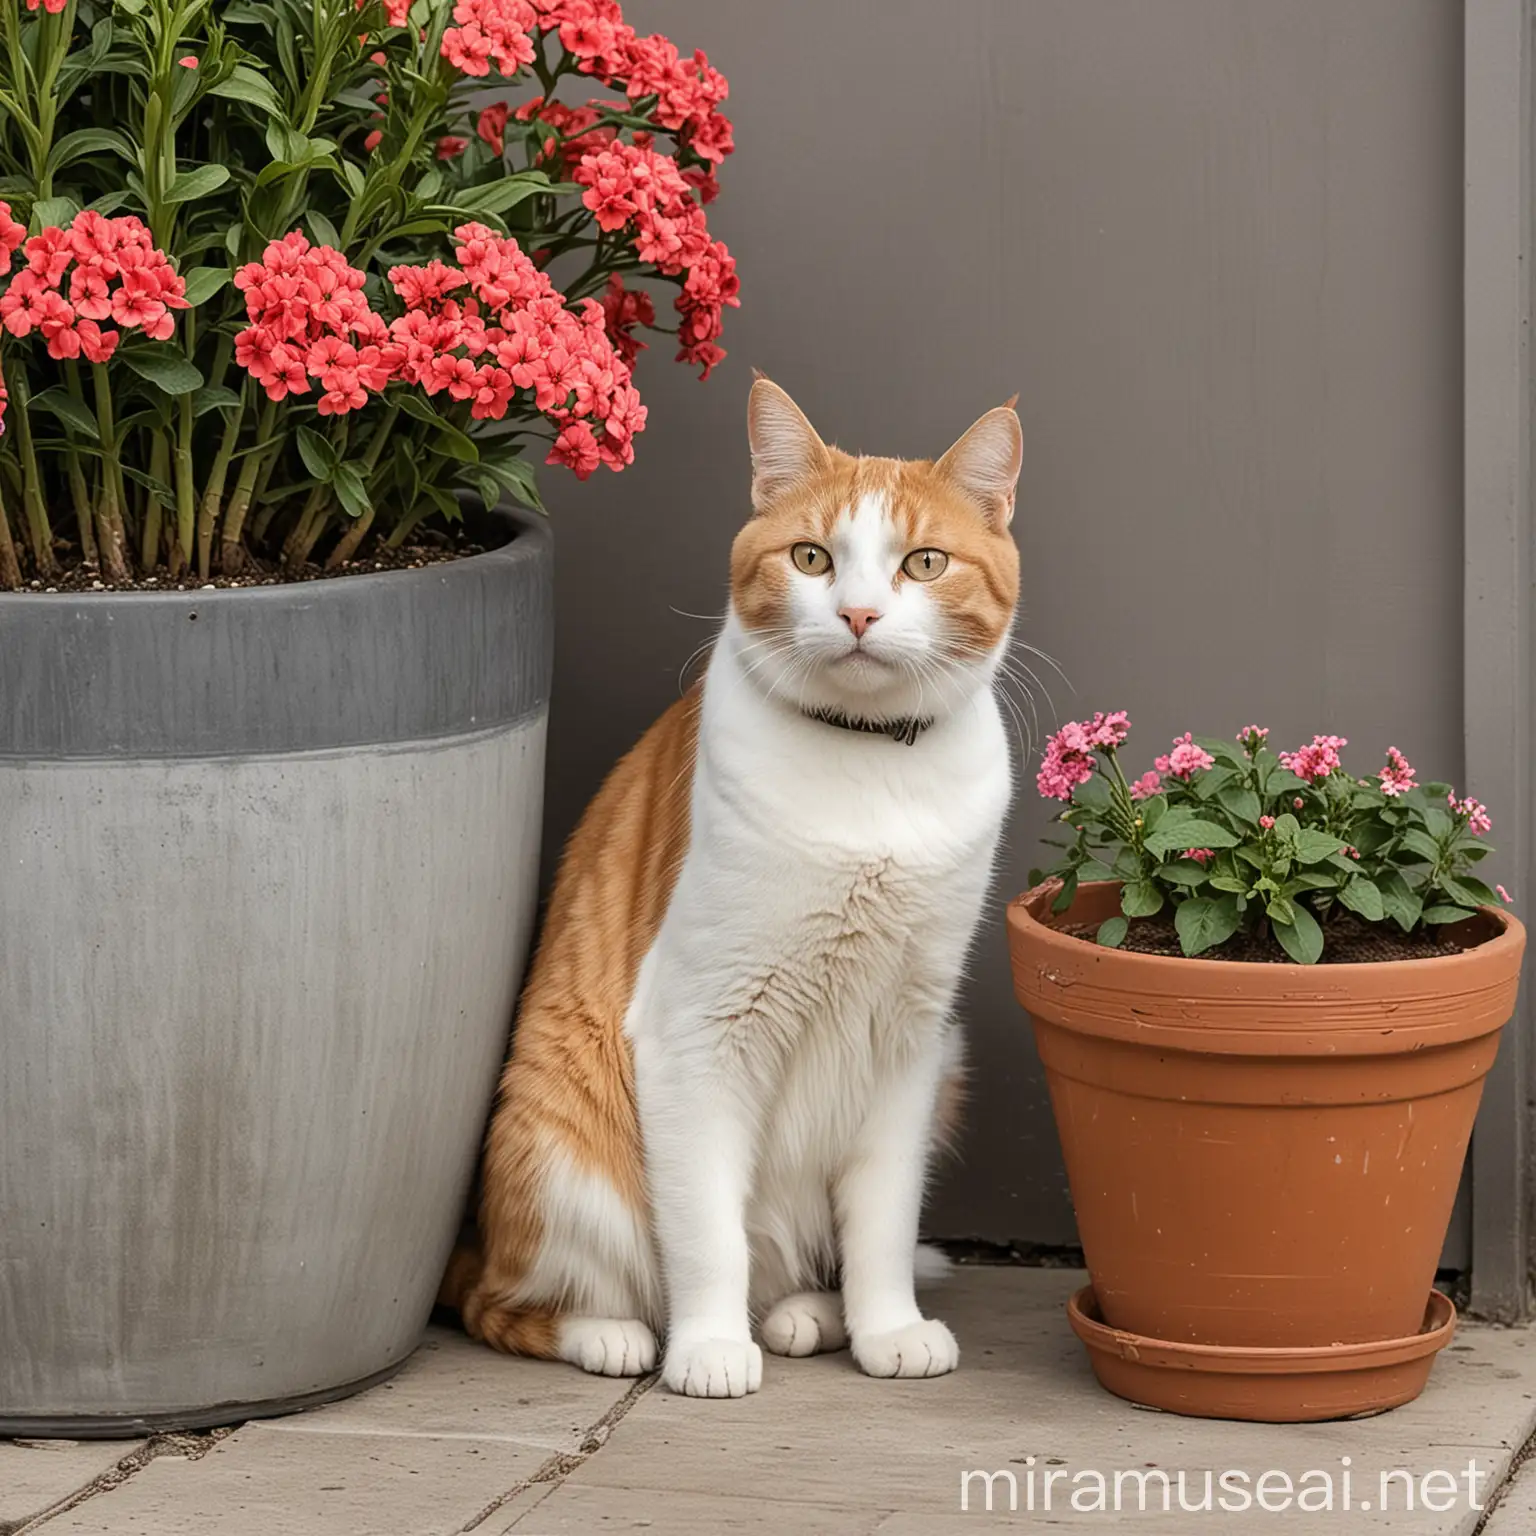 Cat Sitting Beside Flower Pot with Blooming Flower